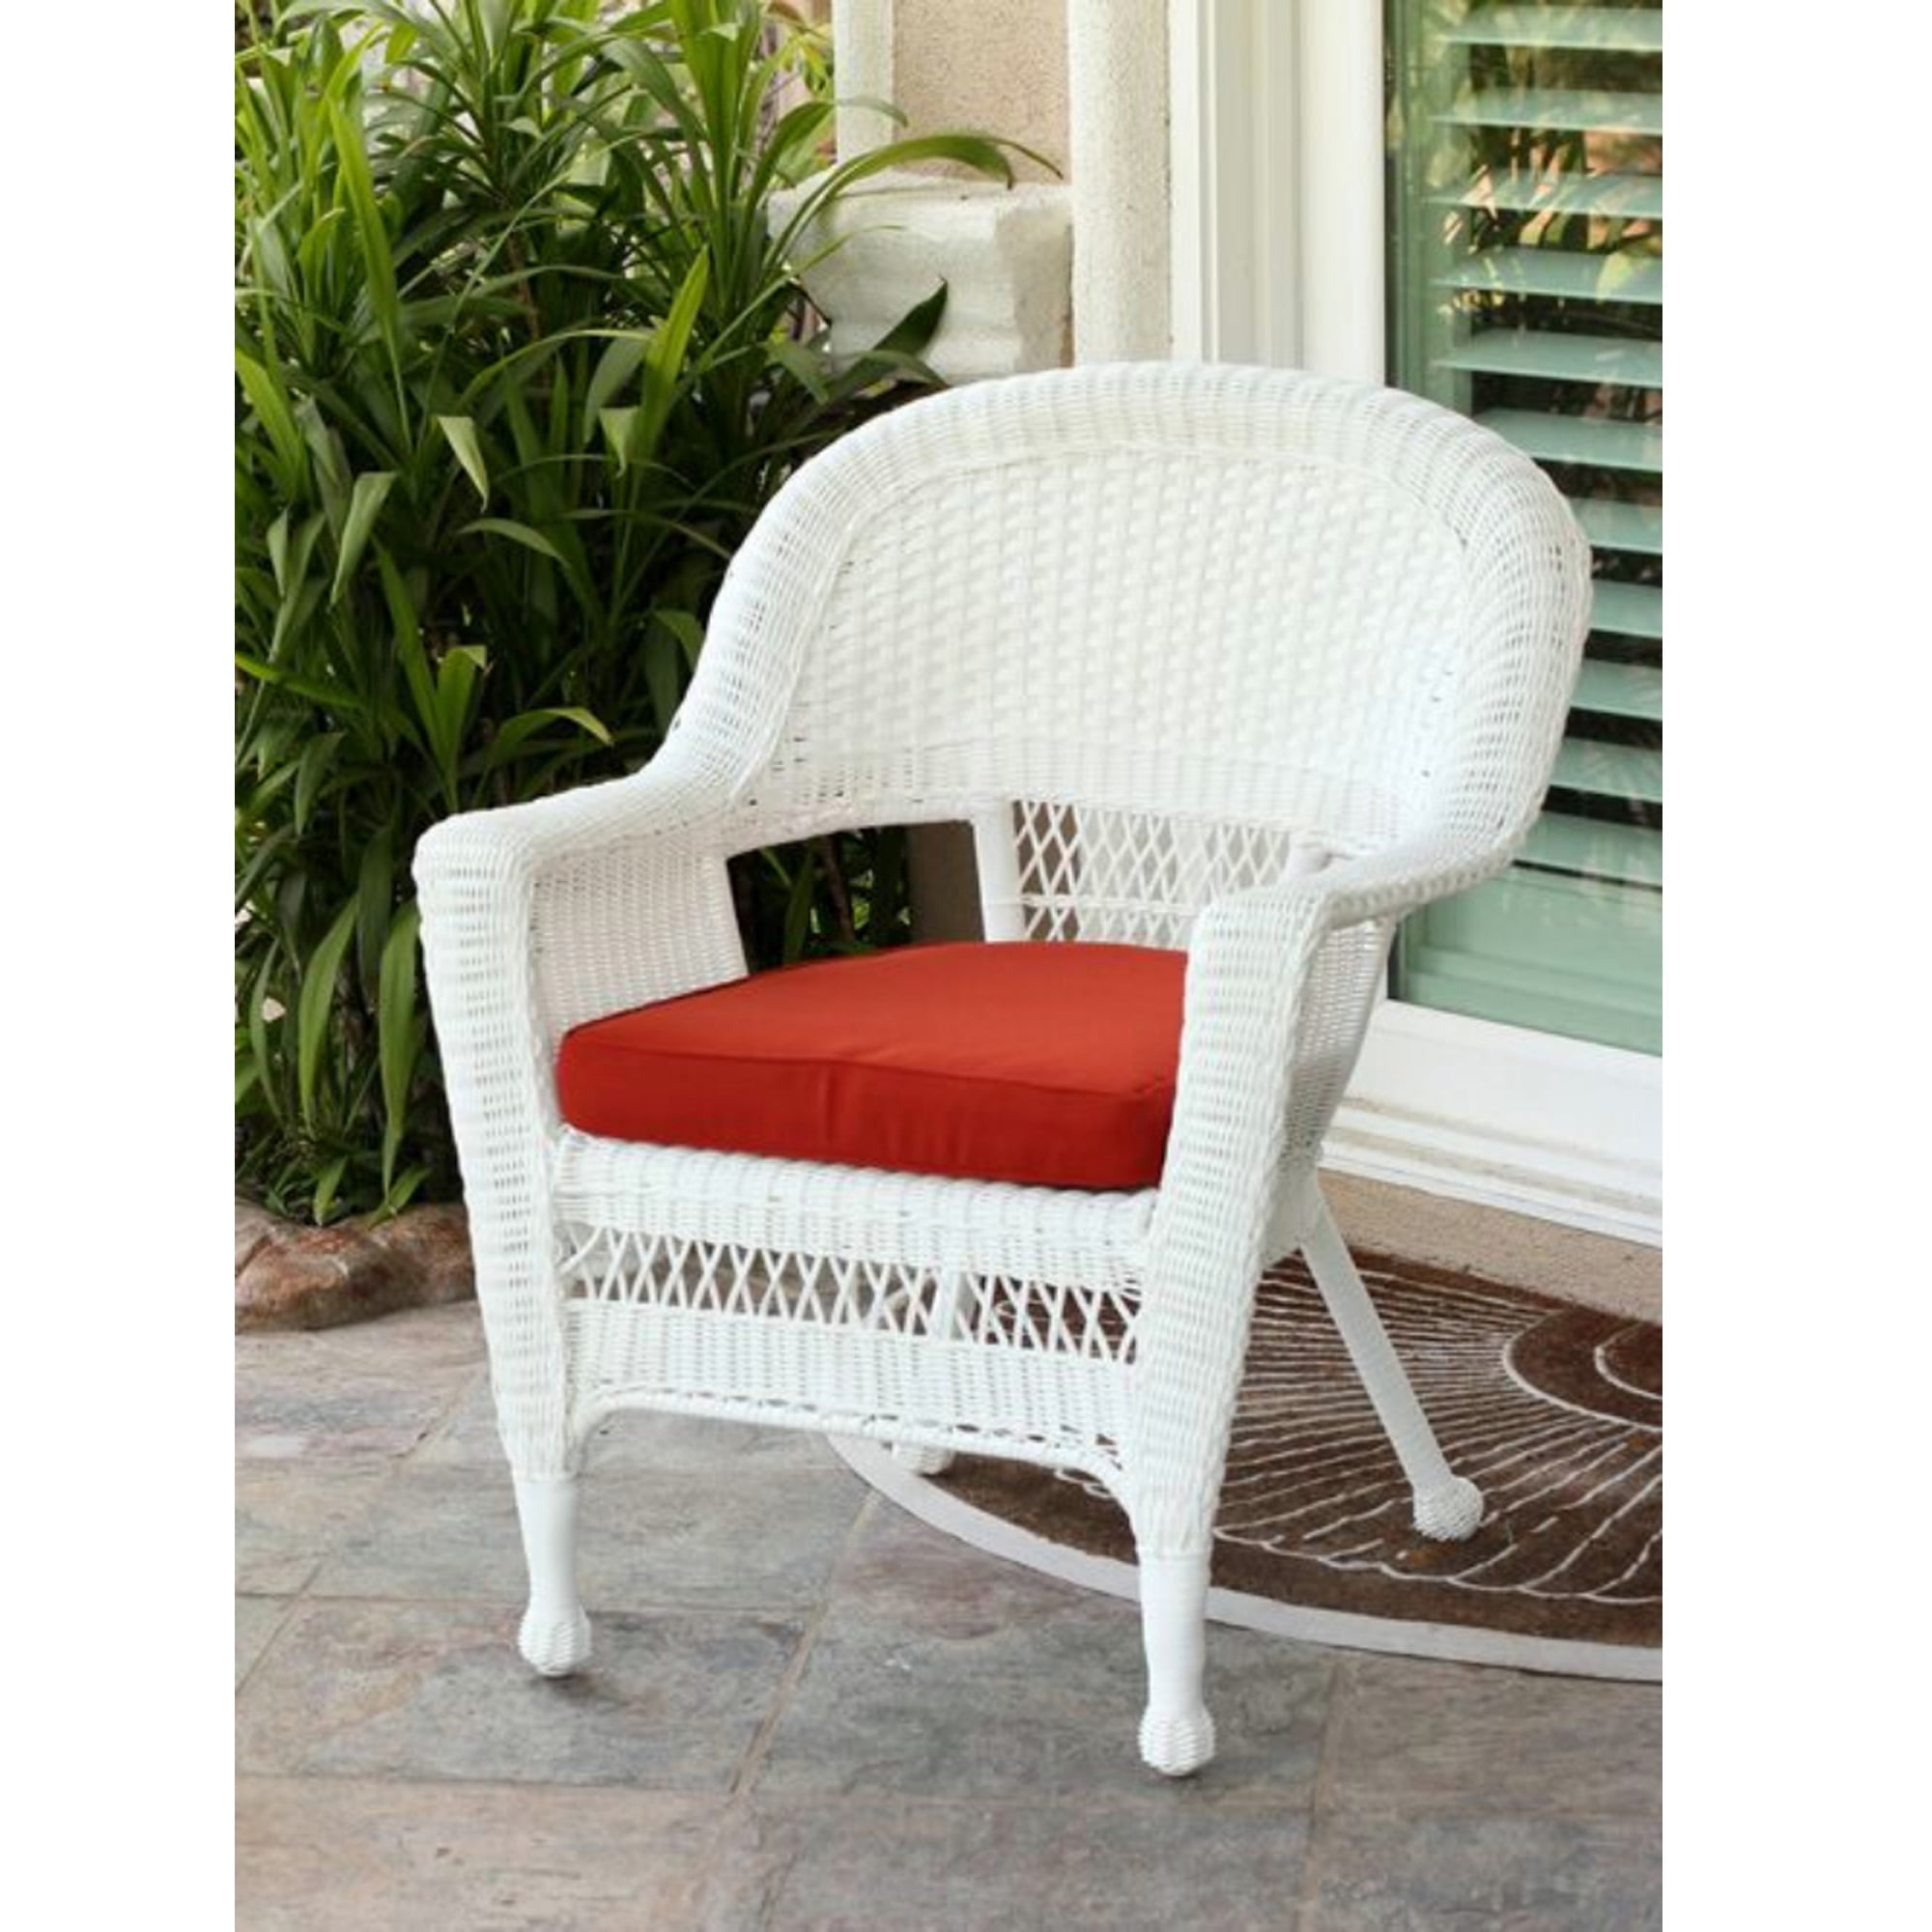 36" White Resin Wicker Outdoor Patio Garden Chair with Red Cushion